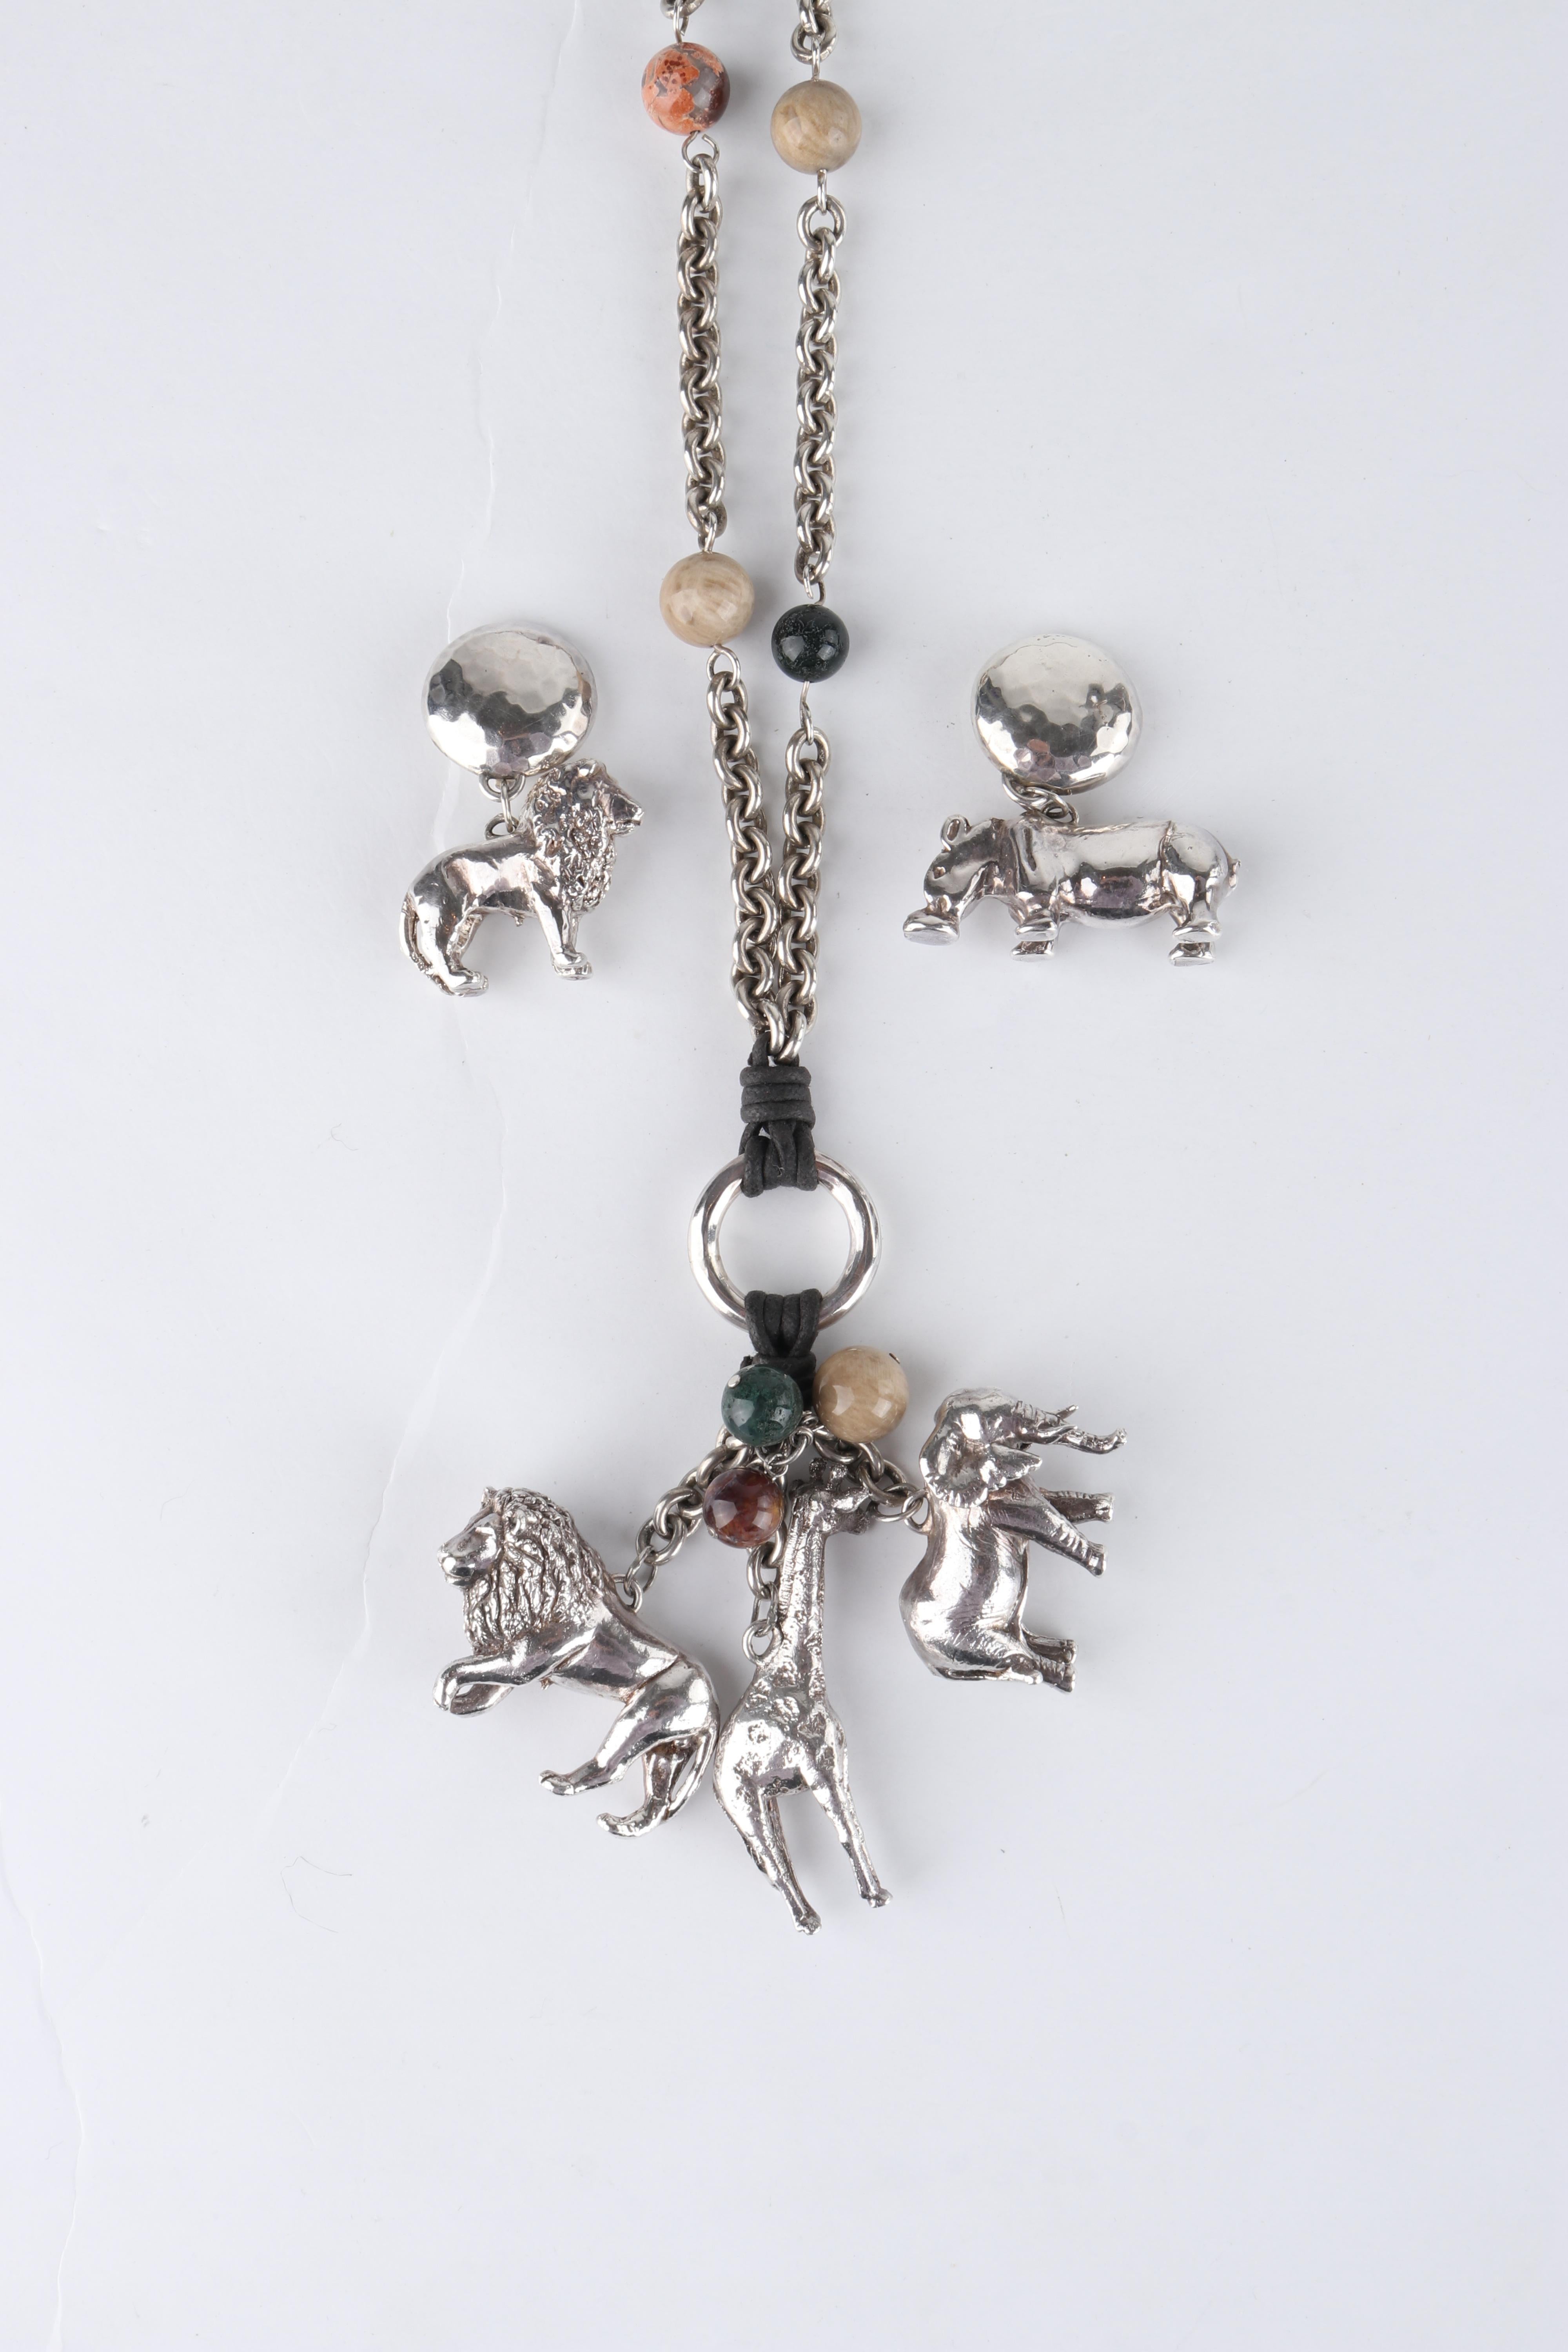 SUSAN CUMMINGS c.1990's Vtg Sterling Silver Beaded Animal Necklace Earrings Set

Marque / Fabricant : Susan Cummings
CIRCA : Collection 